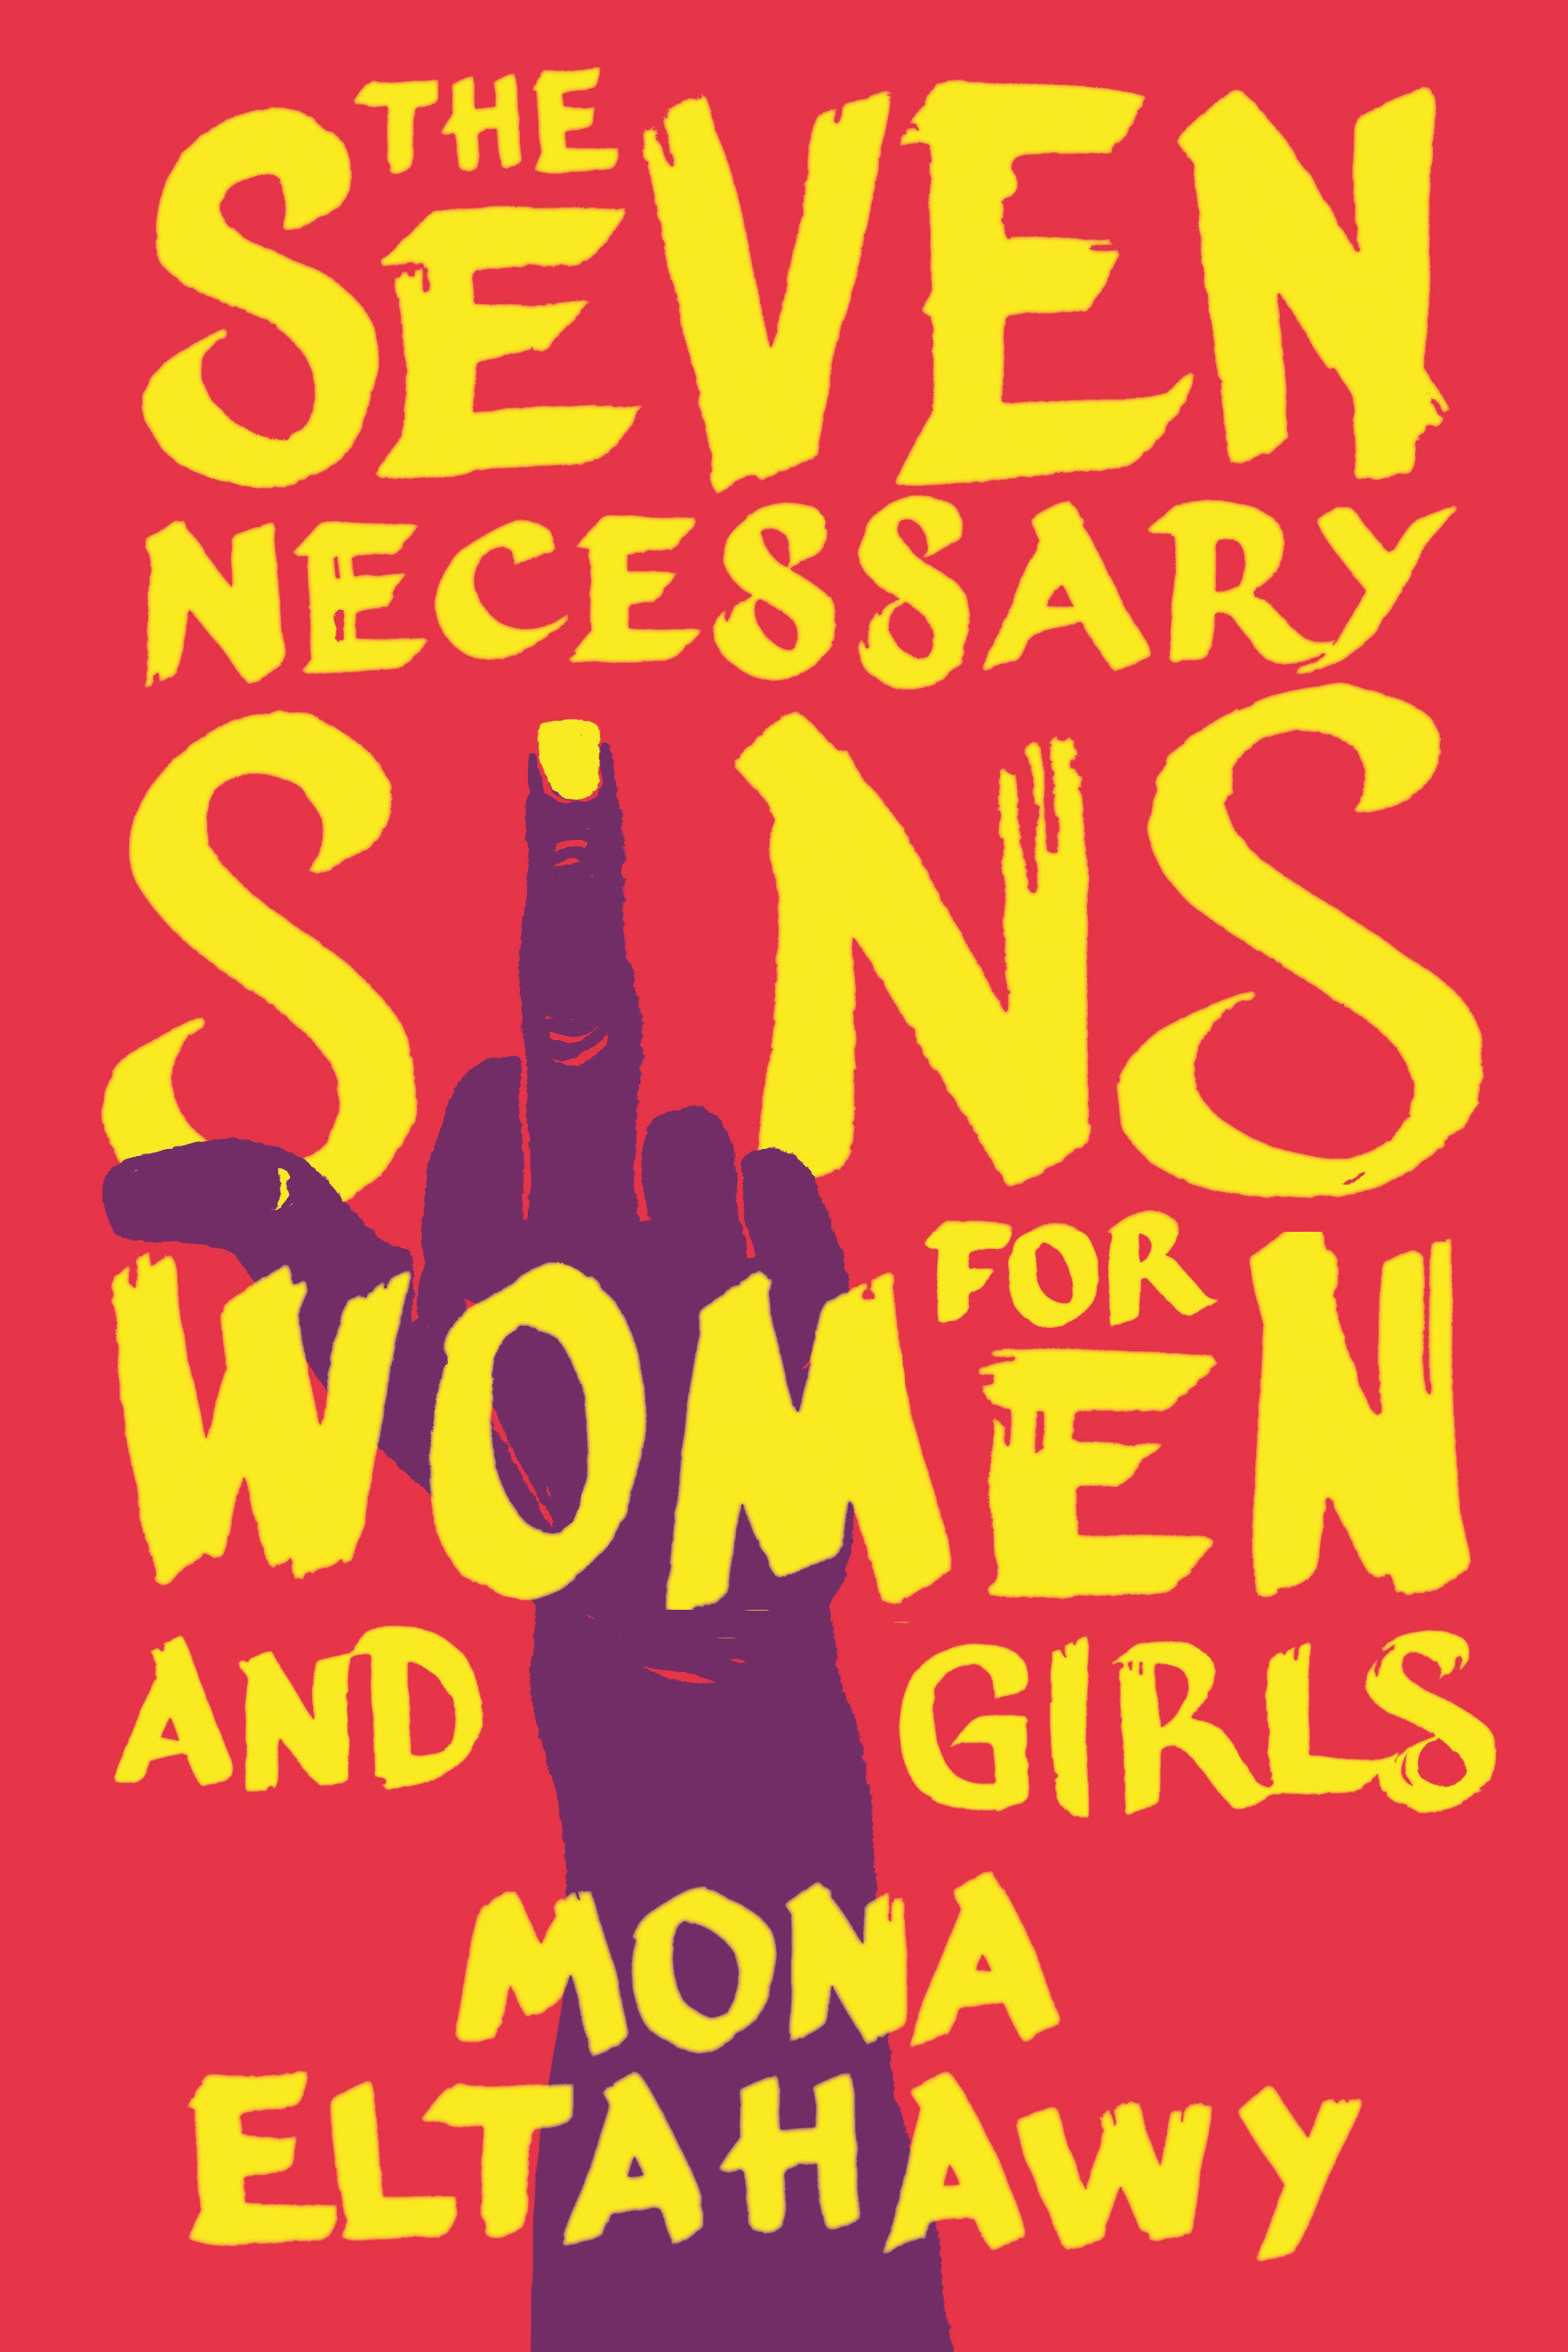 The Seven Necessary Sins for Women And Girls (Hardcover Book)